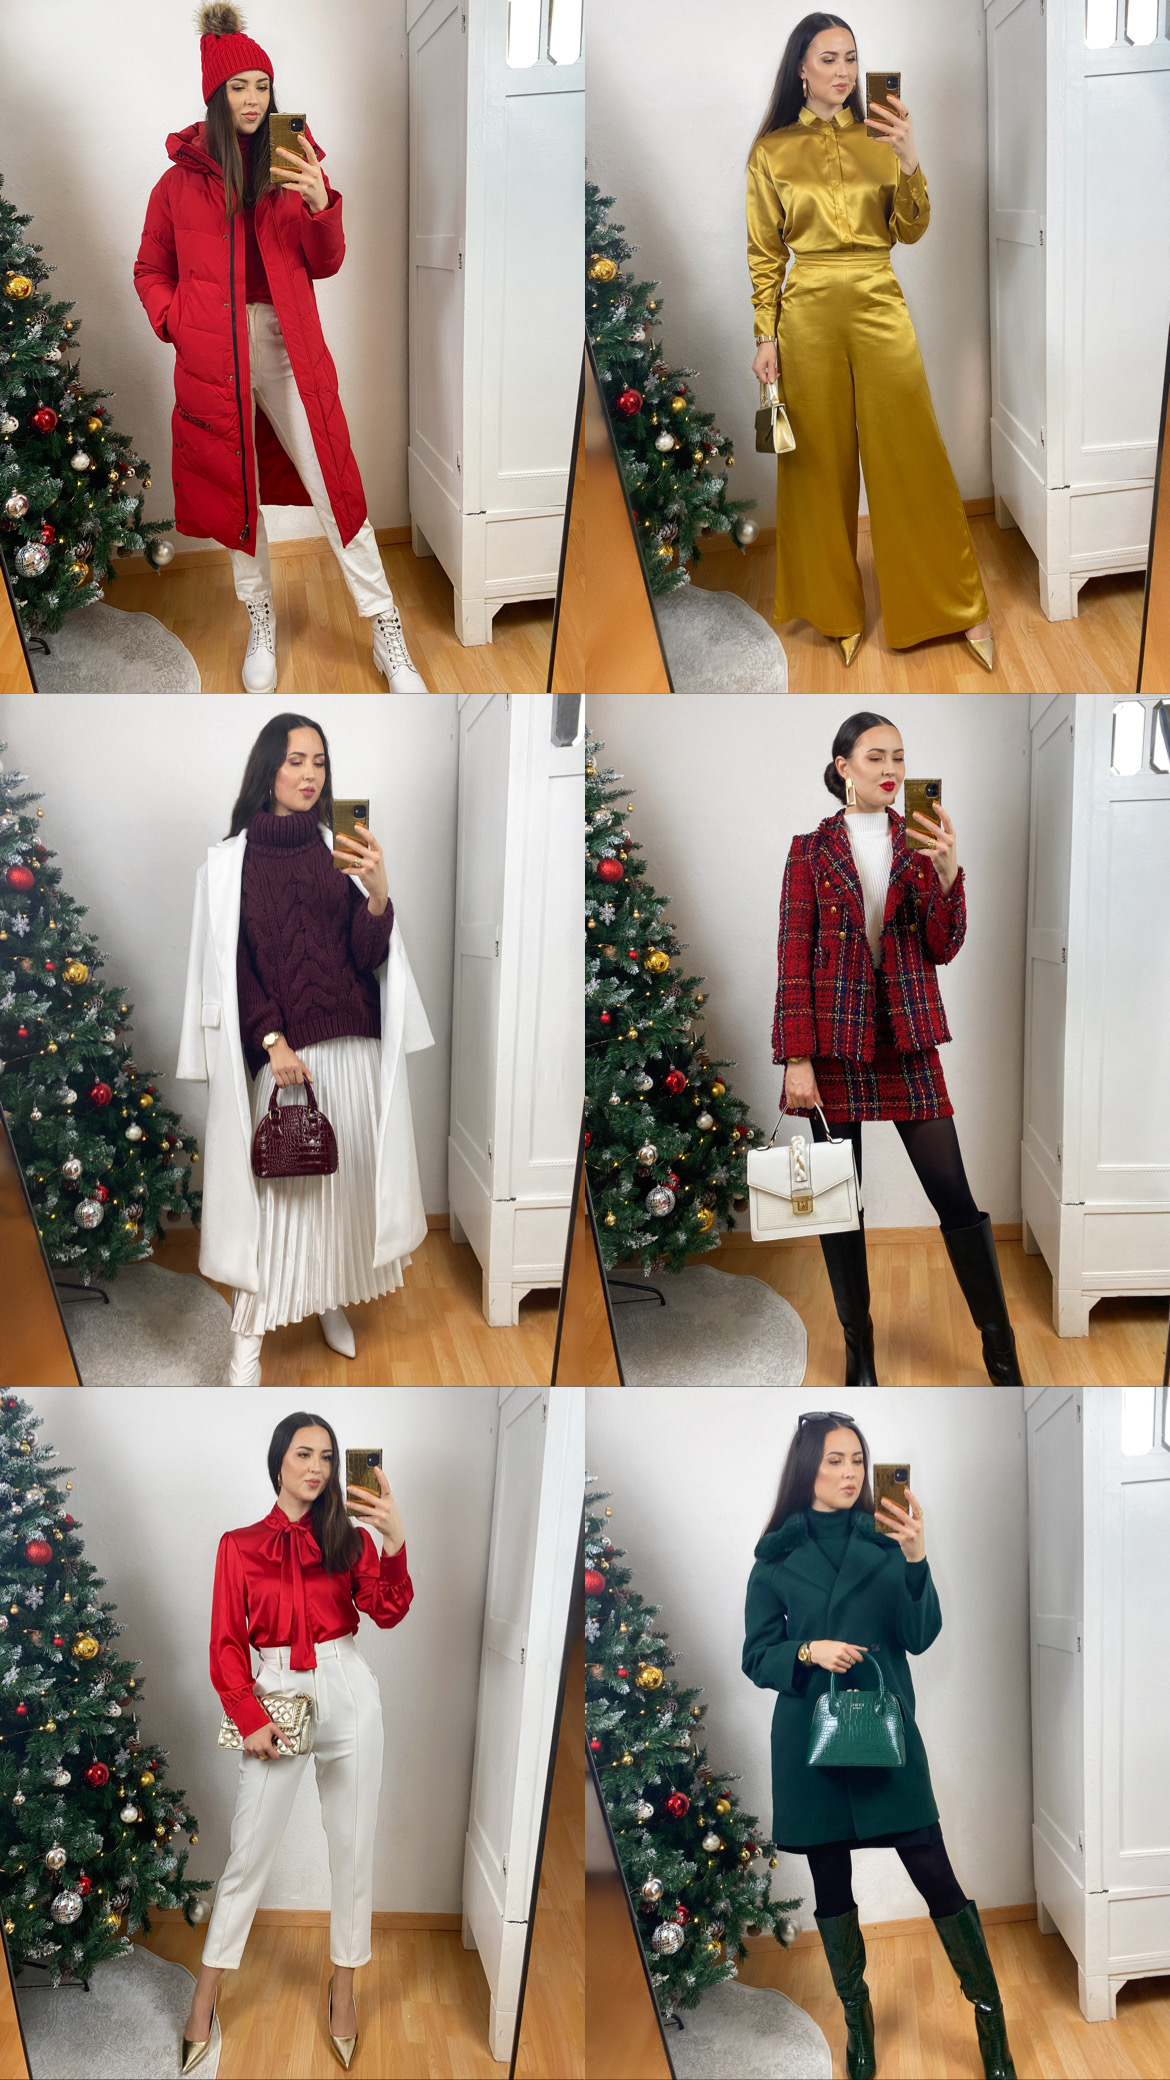 16+ Classy Christmas Outfits That You Can Shop